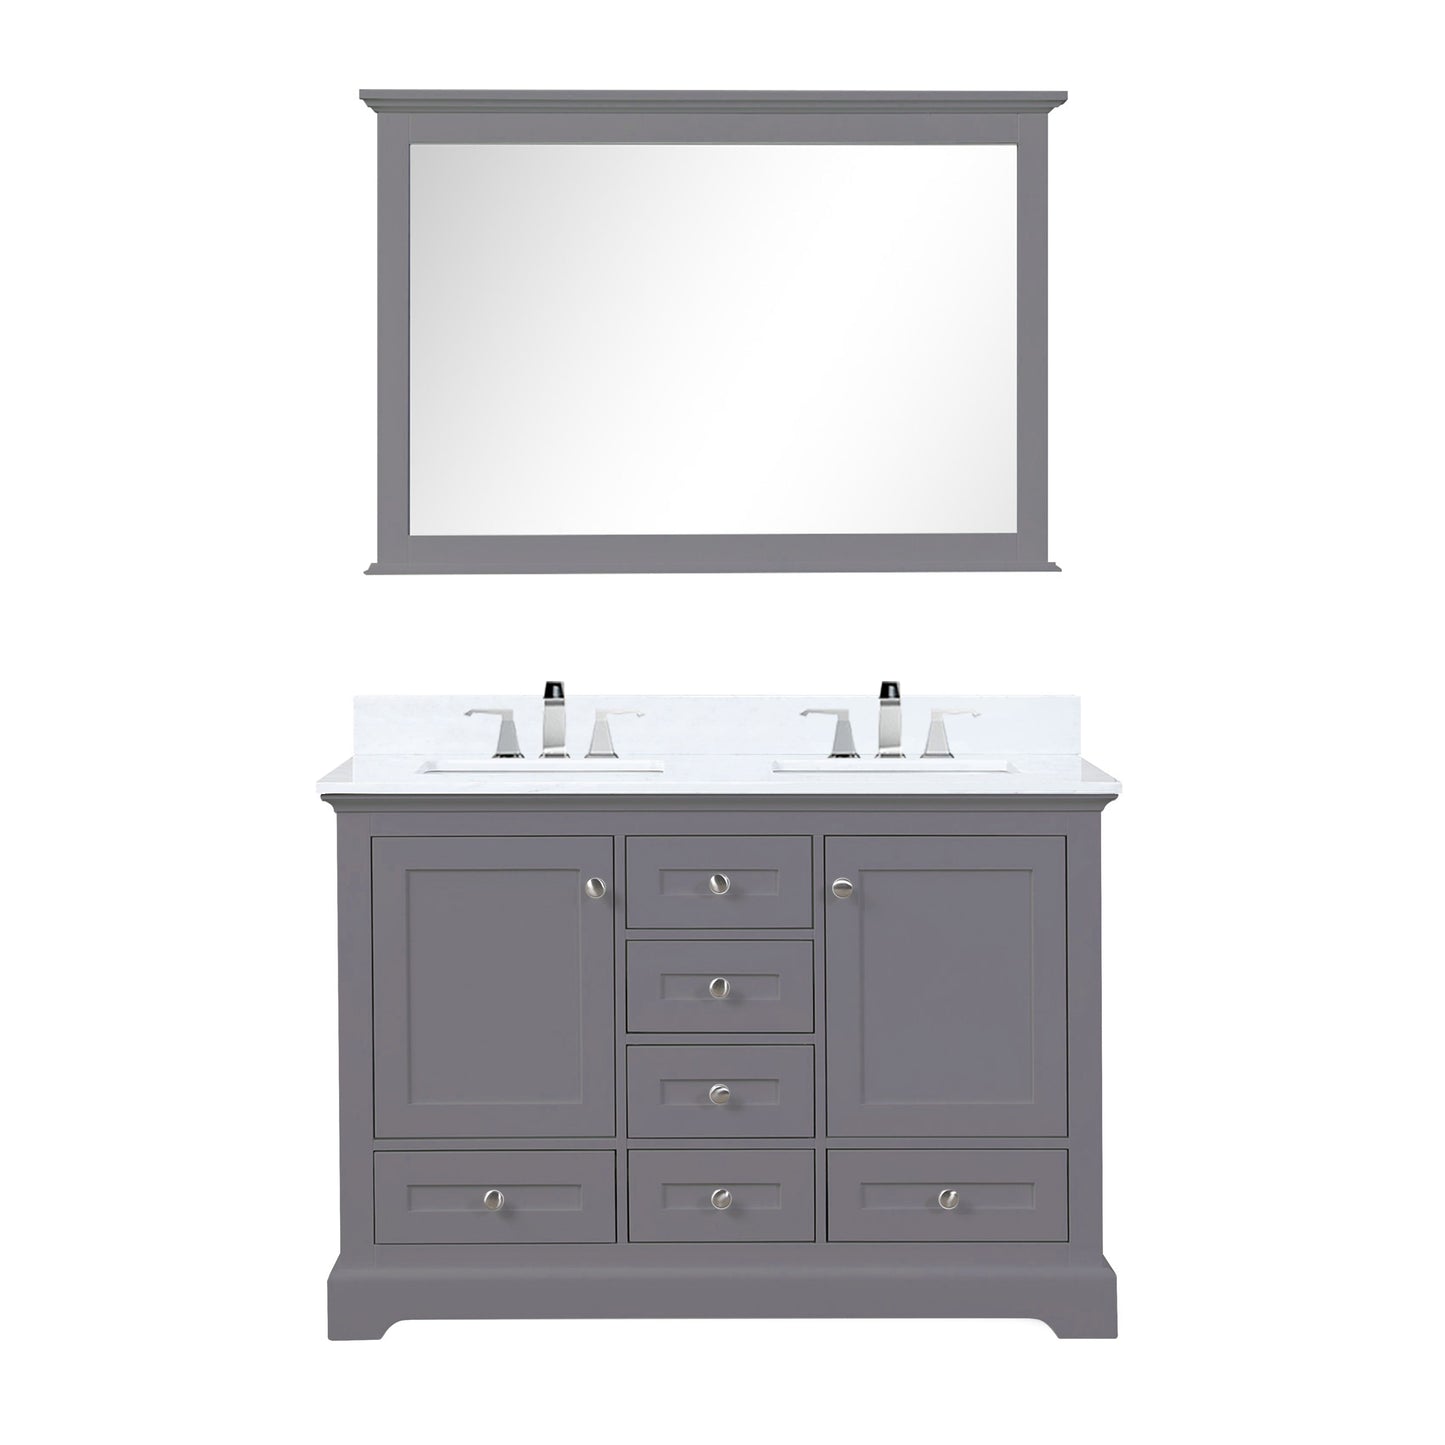 Lexora Collection Dukes 48 inch Double Bath Vanity, Cultured Marble Top, Faucet Set, 46 inch Mirror - Luxe Bathroom Vanities